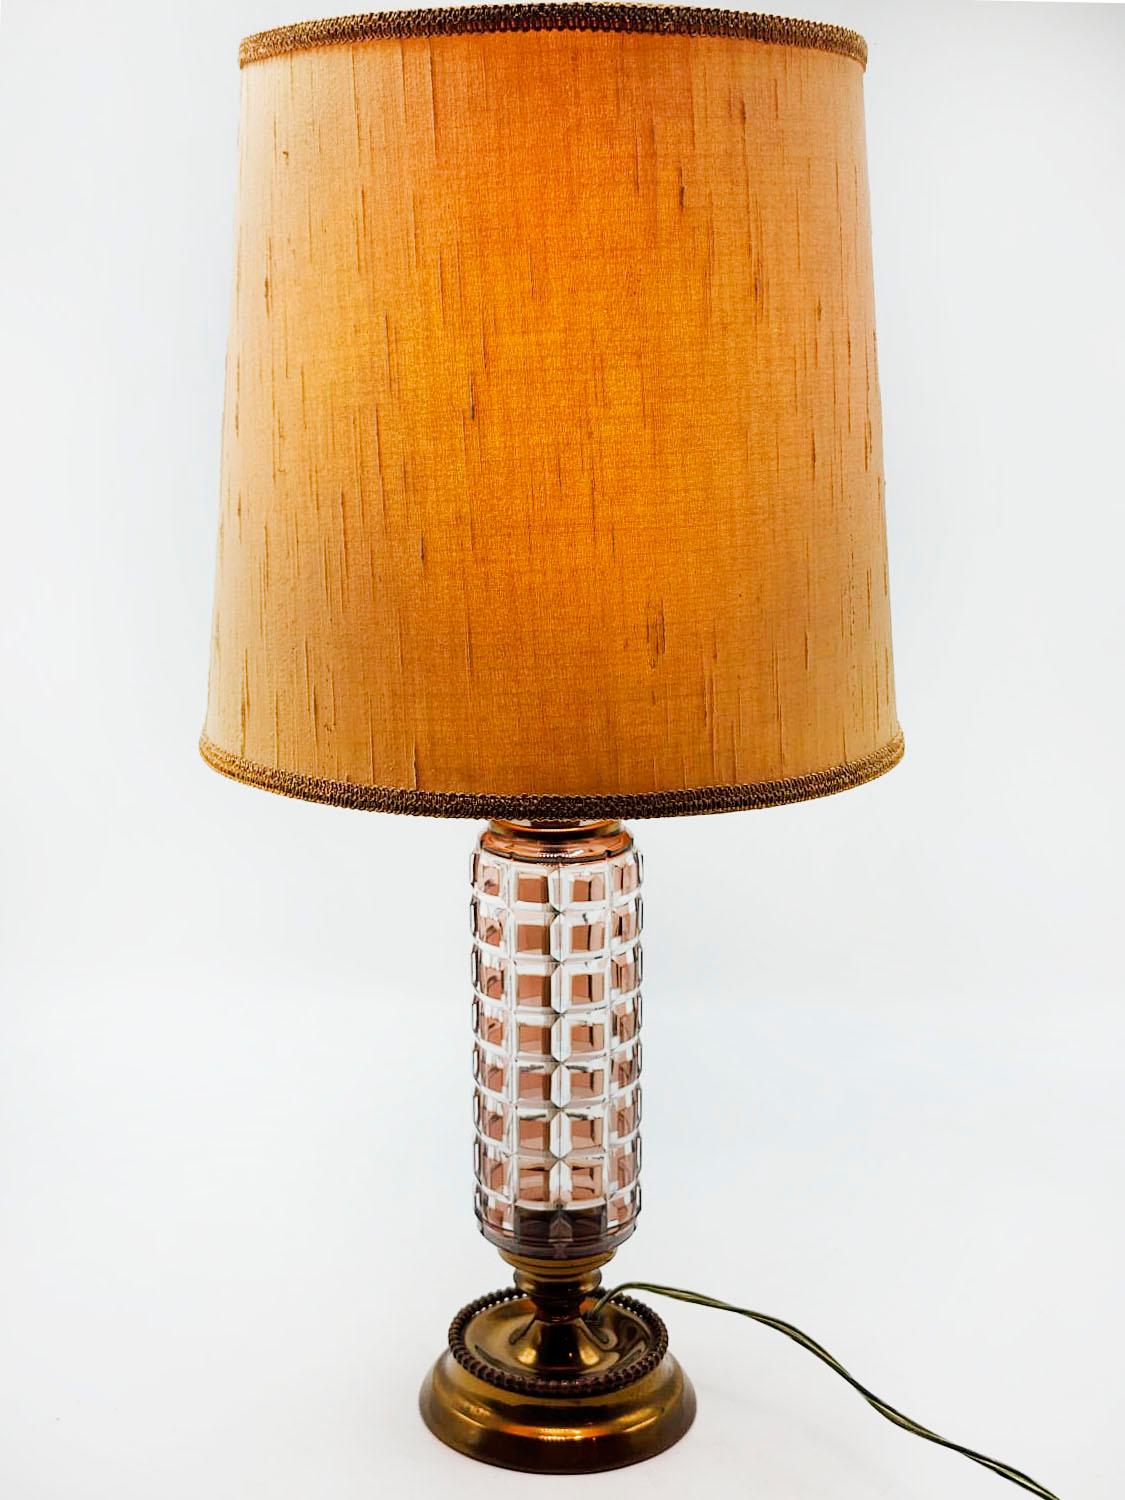 Art Deco Vintage art deco table lamp from the 20th century